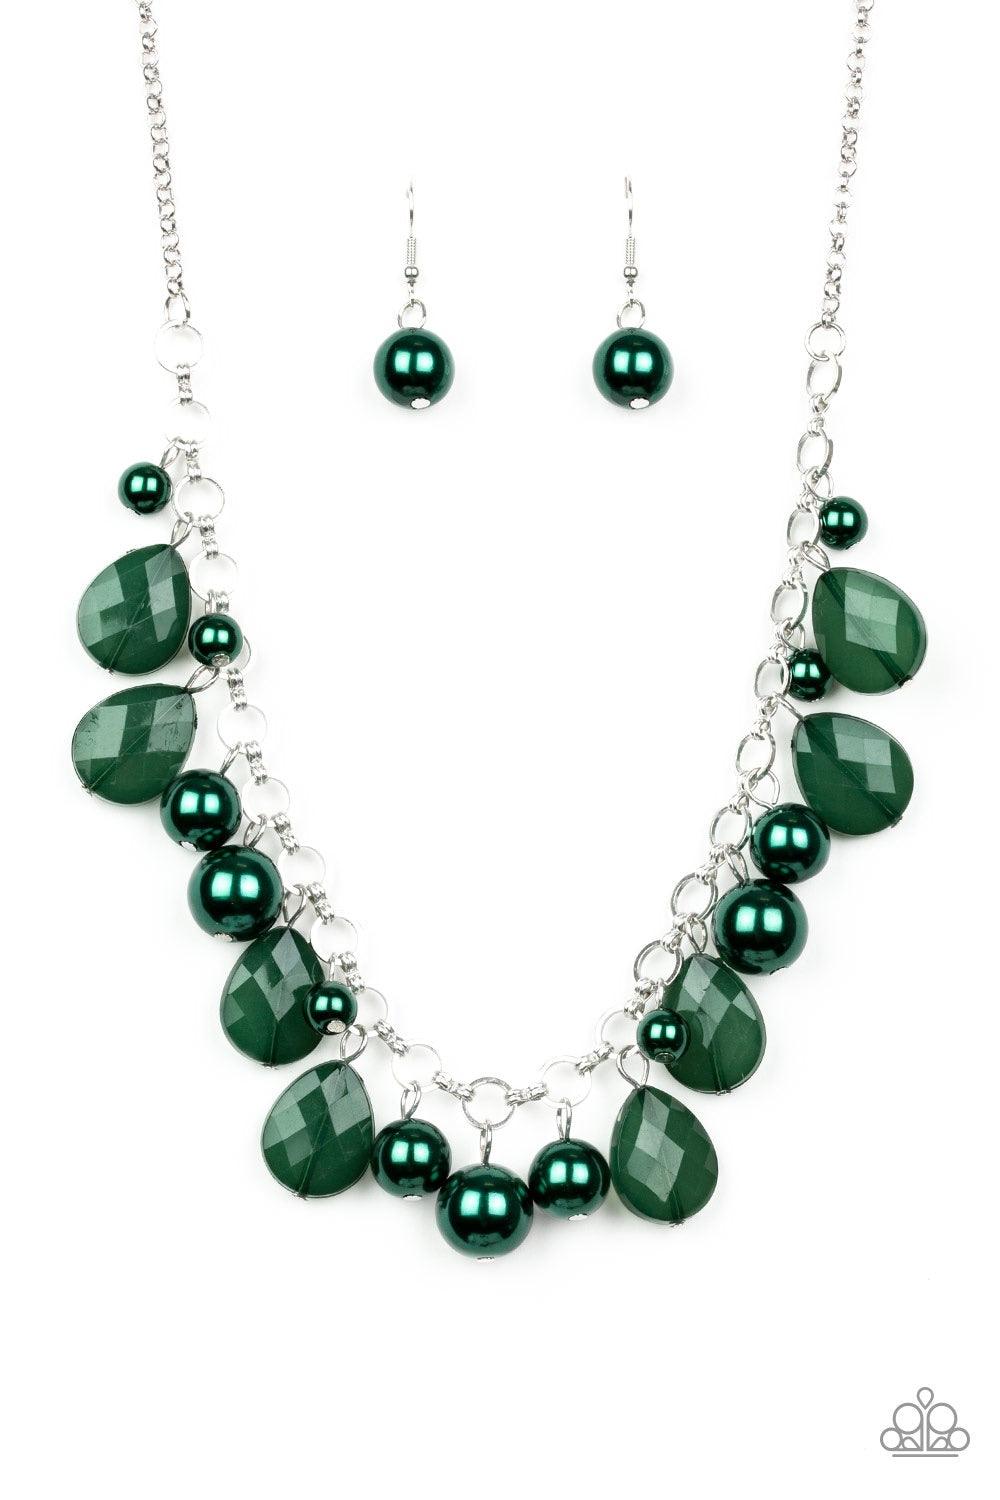 Paparazzi Accessories Pacific Posh - Green A refined collection of opaque green teardrops and pearly green beads swing from shimmery silver links below the collar, creating a fabulous fringe. Features an adjustable clasp closure. Jewelry